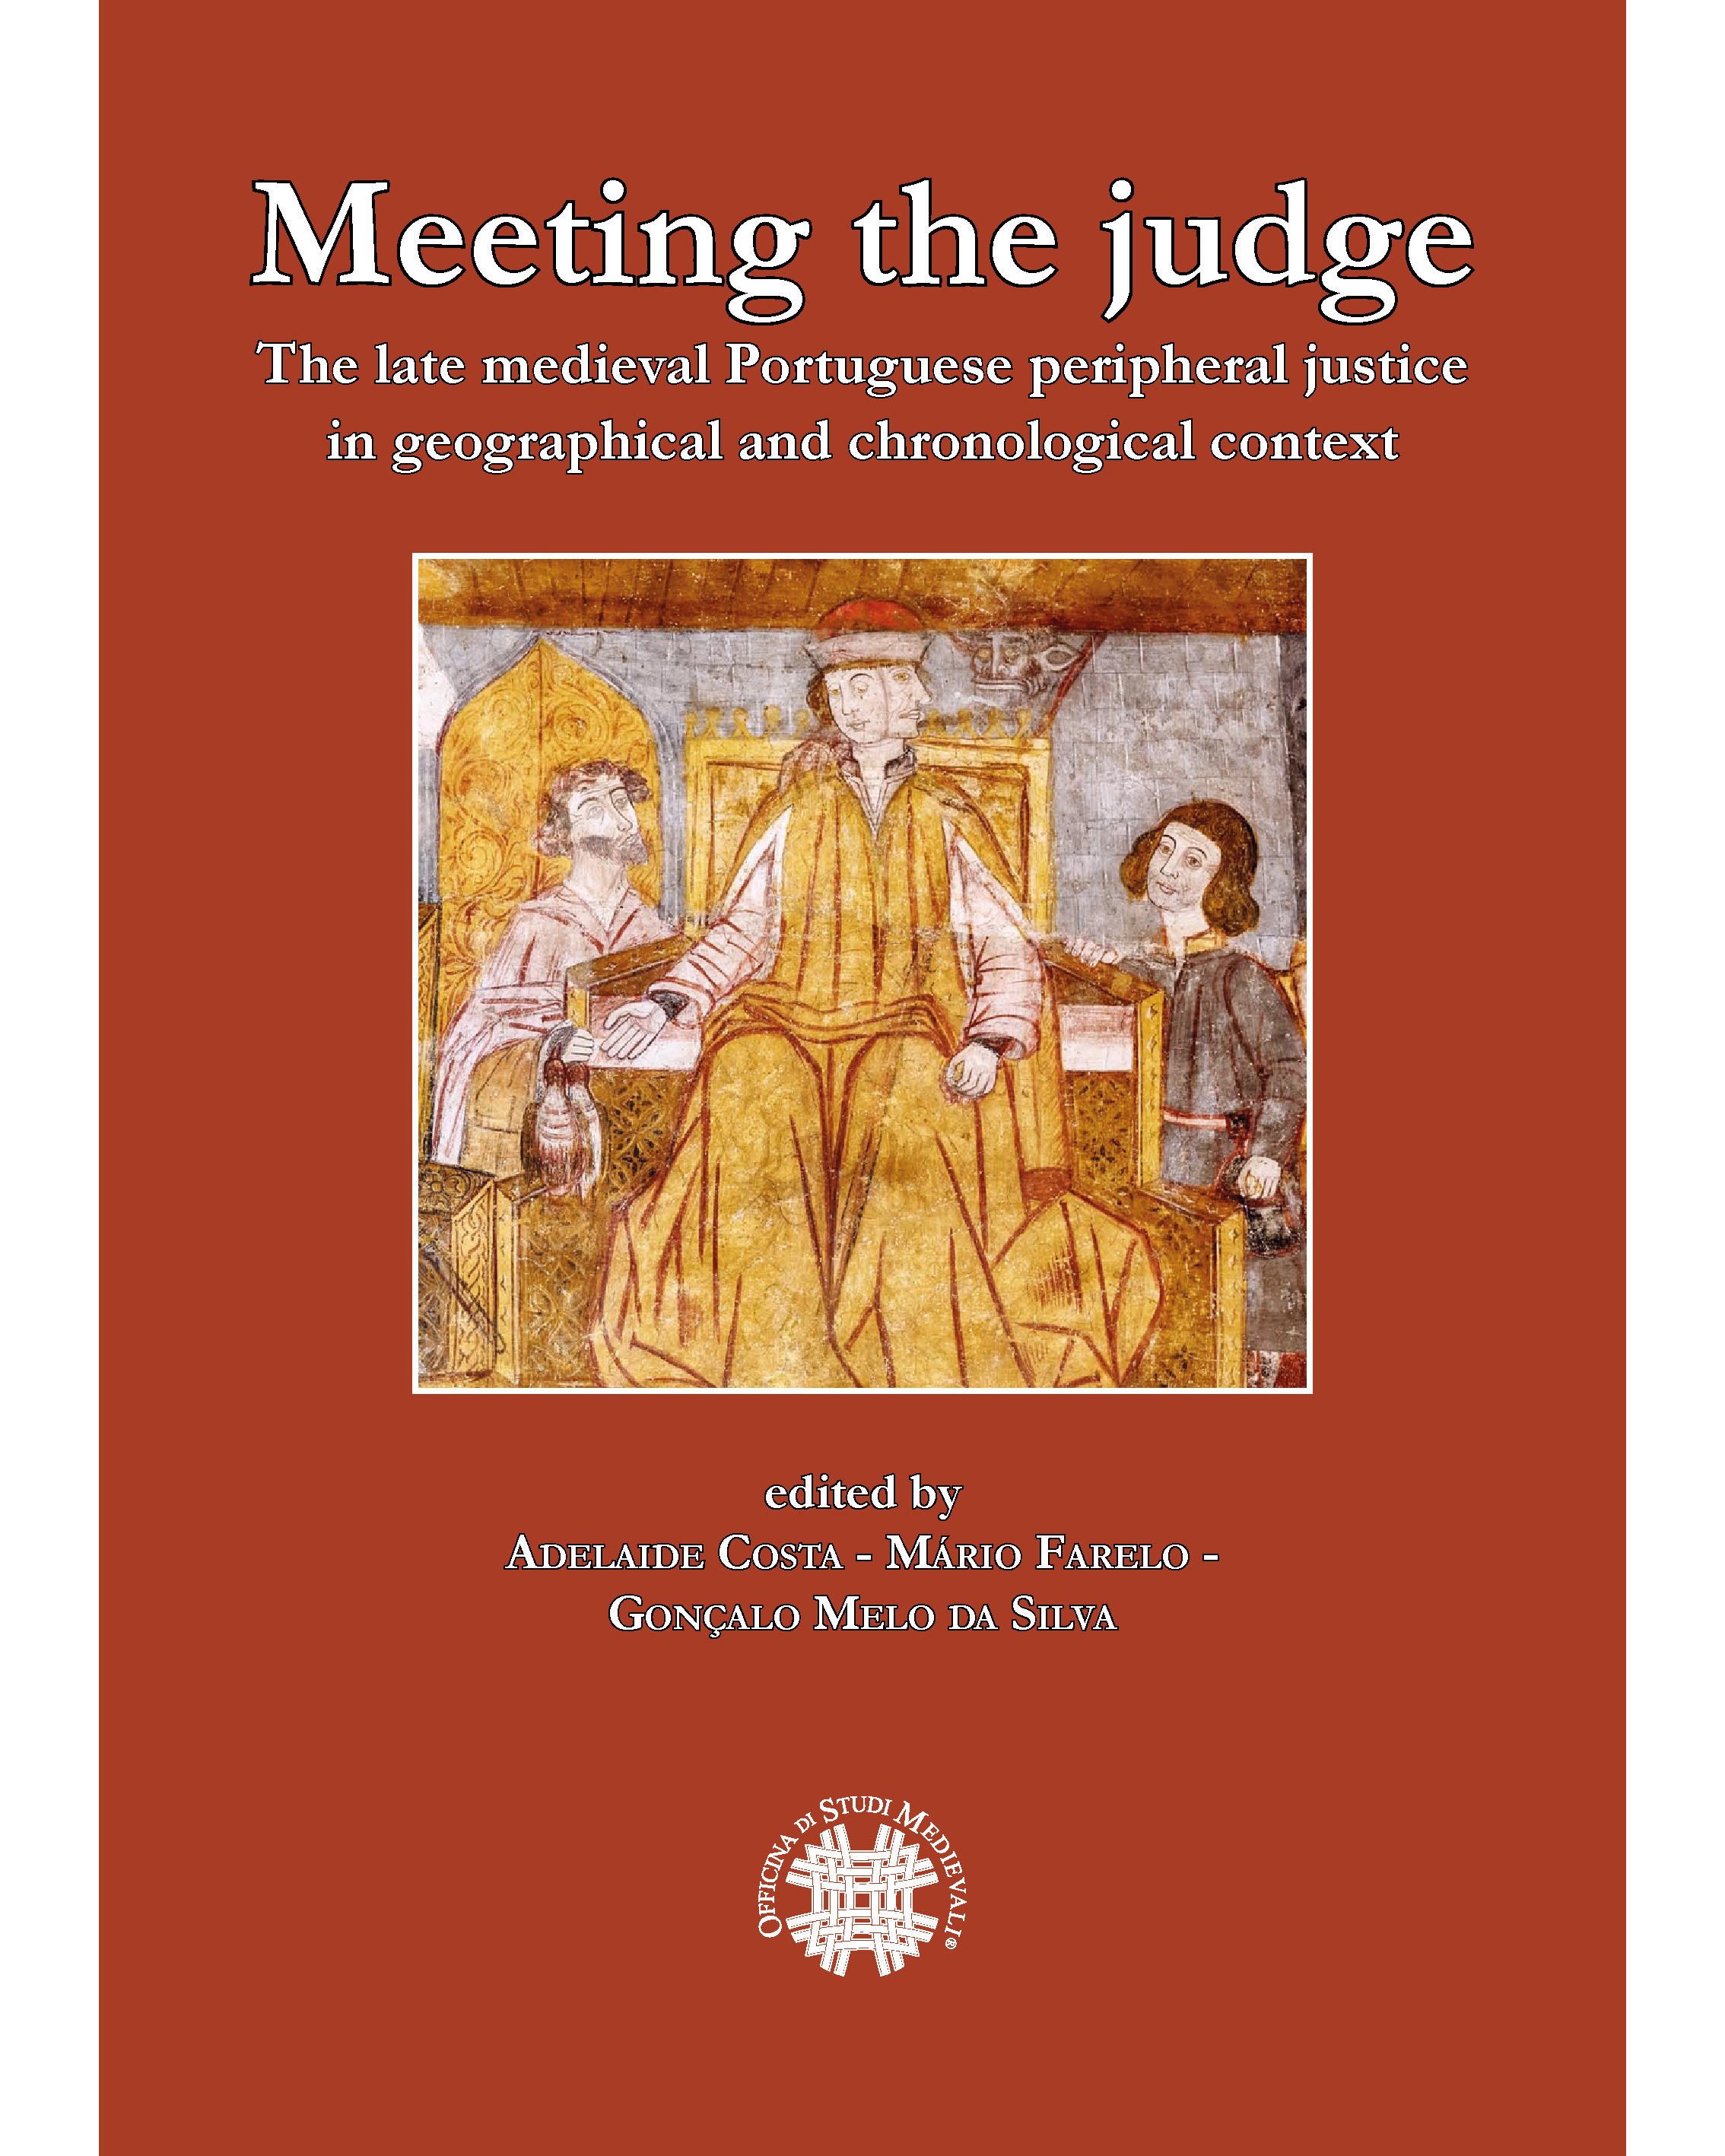 Publicação do livro "Meeting the judge. The late medieval Portuguese peripheral justice in geographical and chronogical context" image